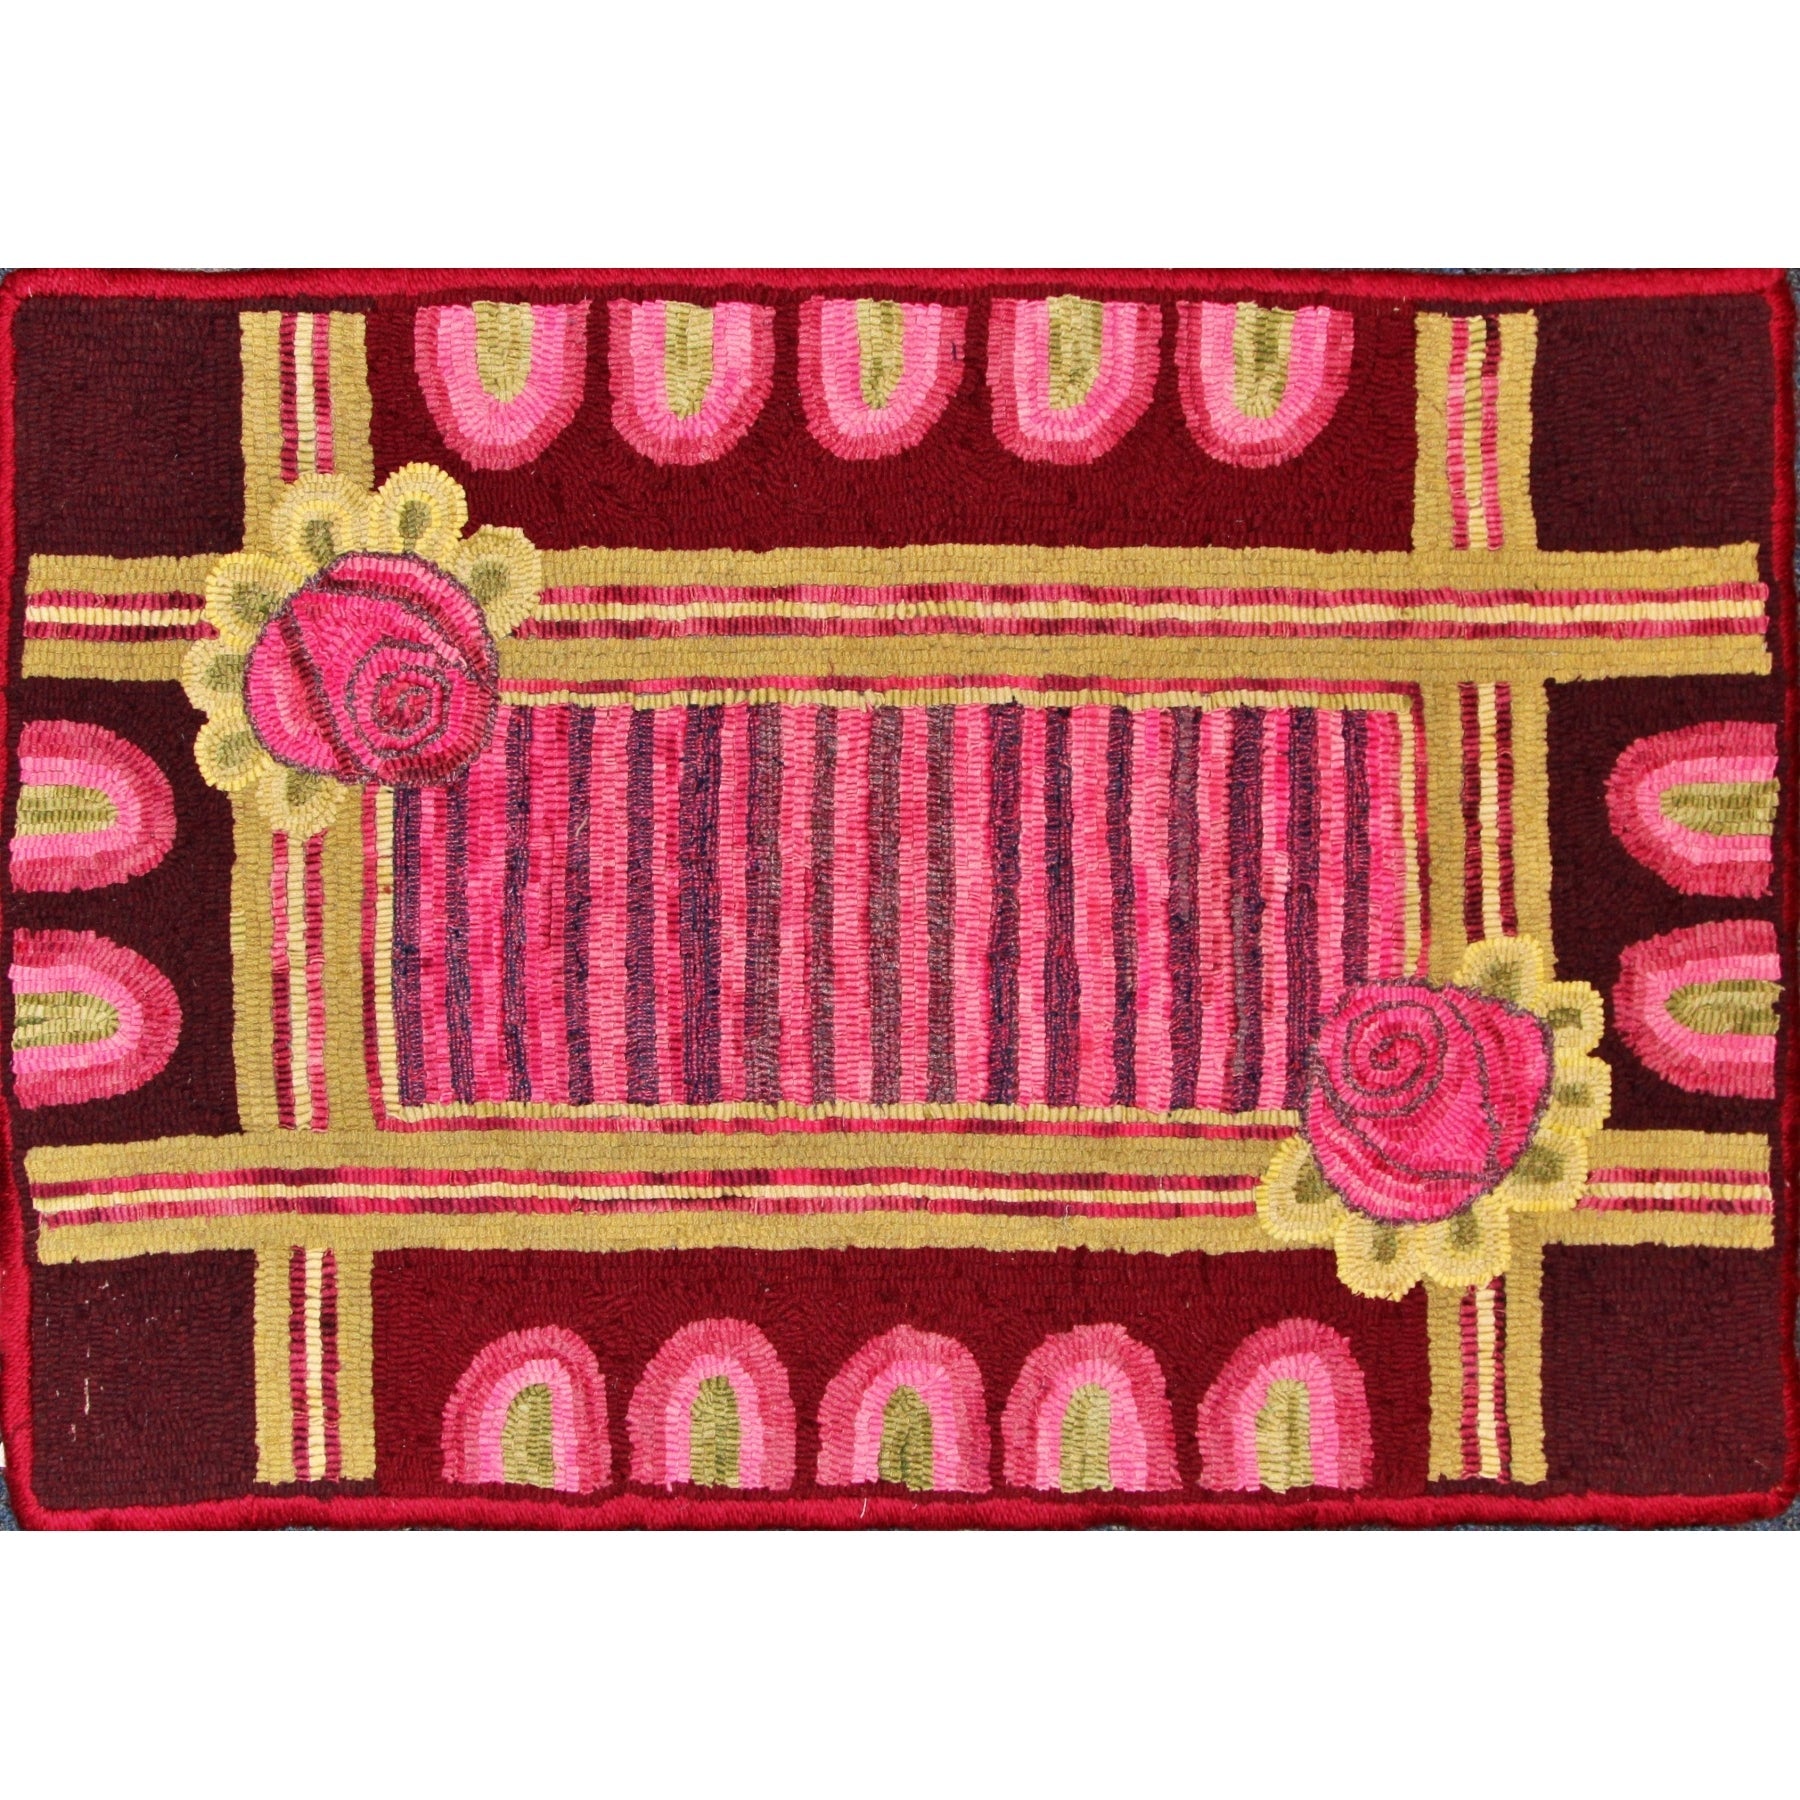 Paschal Rose Antique - Small, rug hooked by Judy Peluso